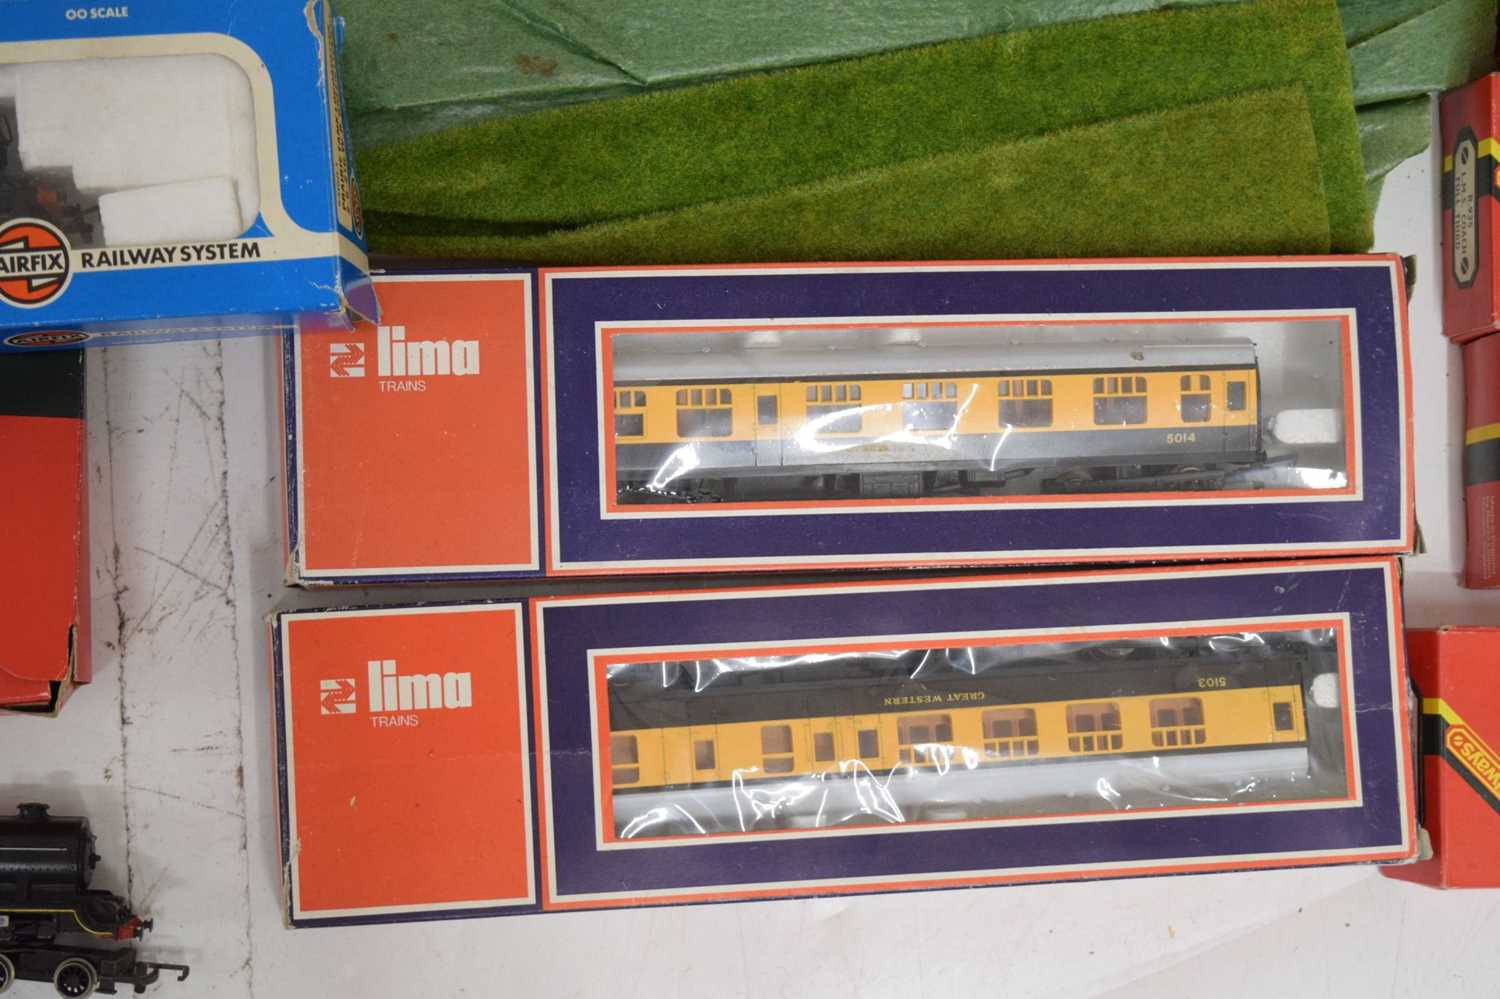 Mixed quantity of 00 gauge railway trainset locomotives, wagons and carriages - Image 7 of 12